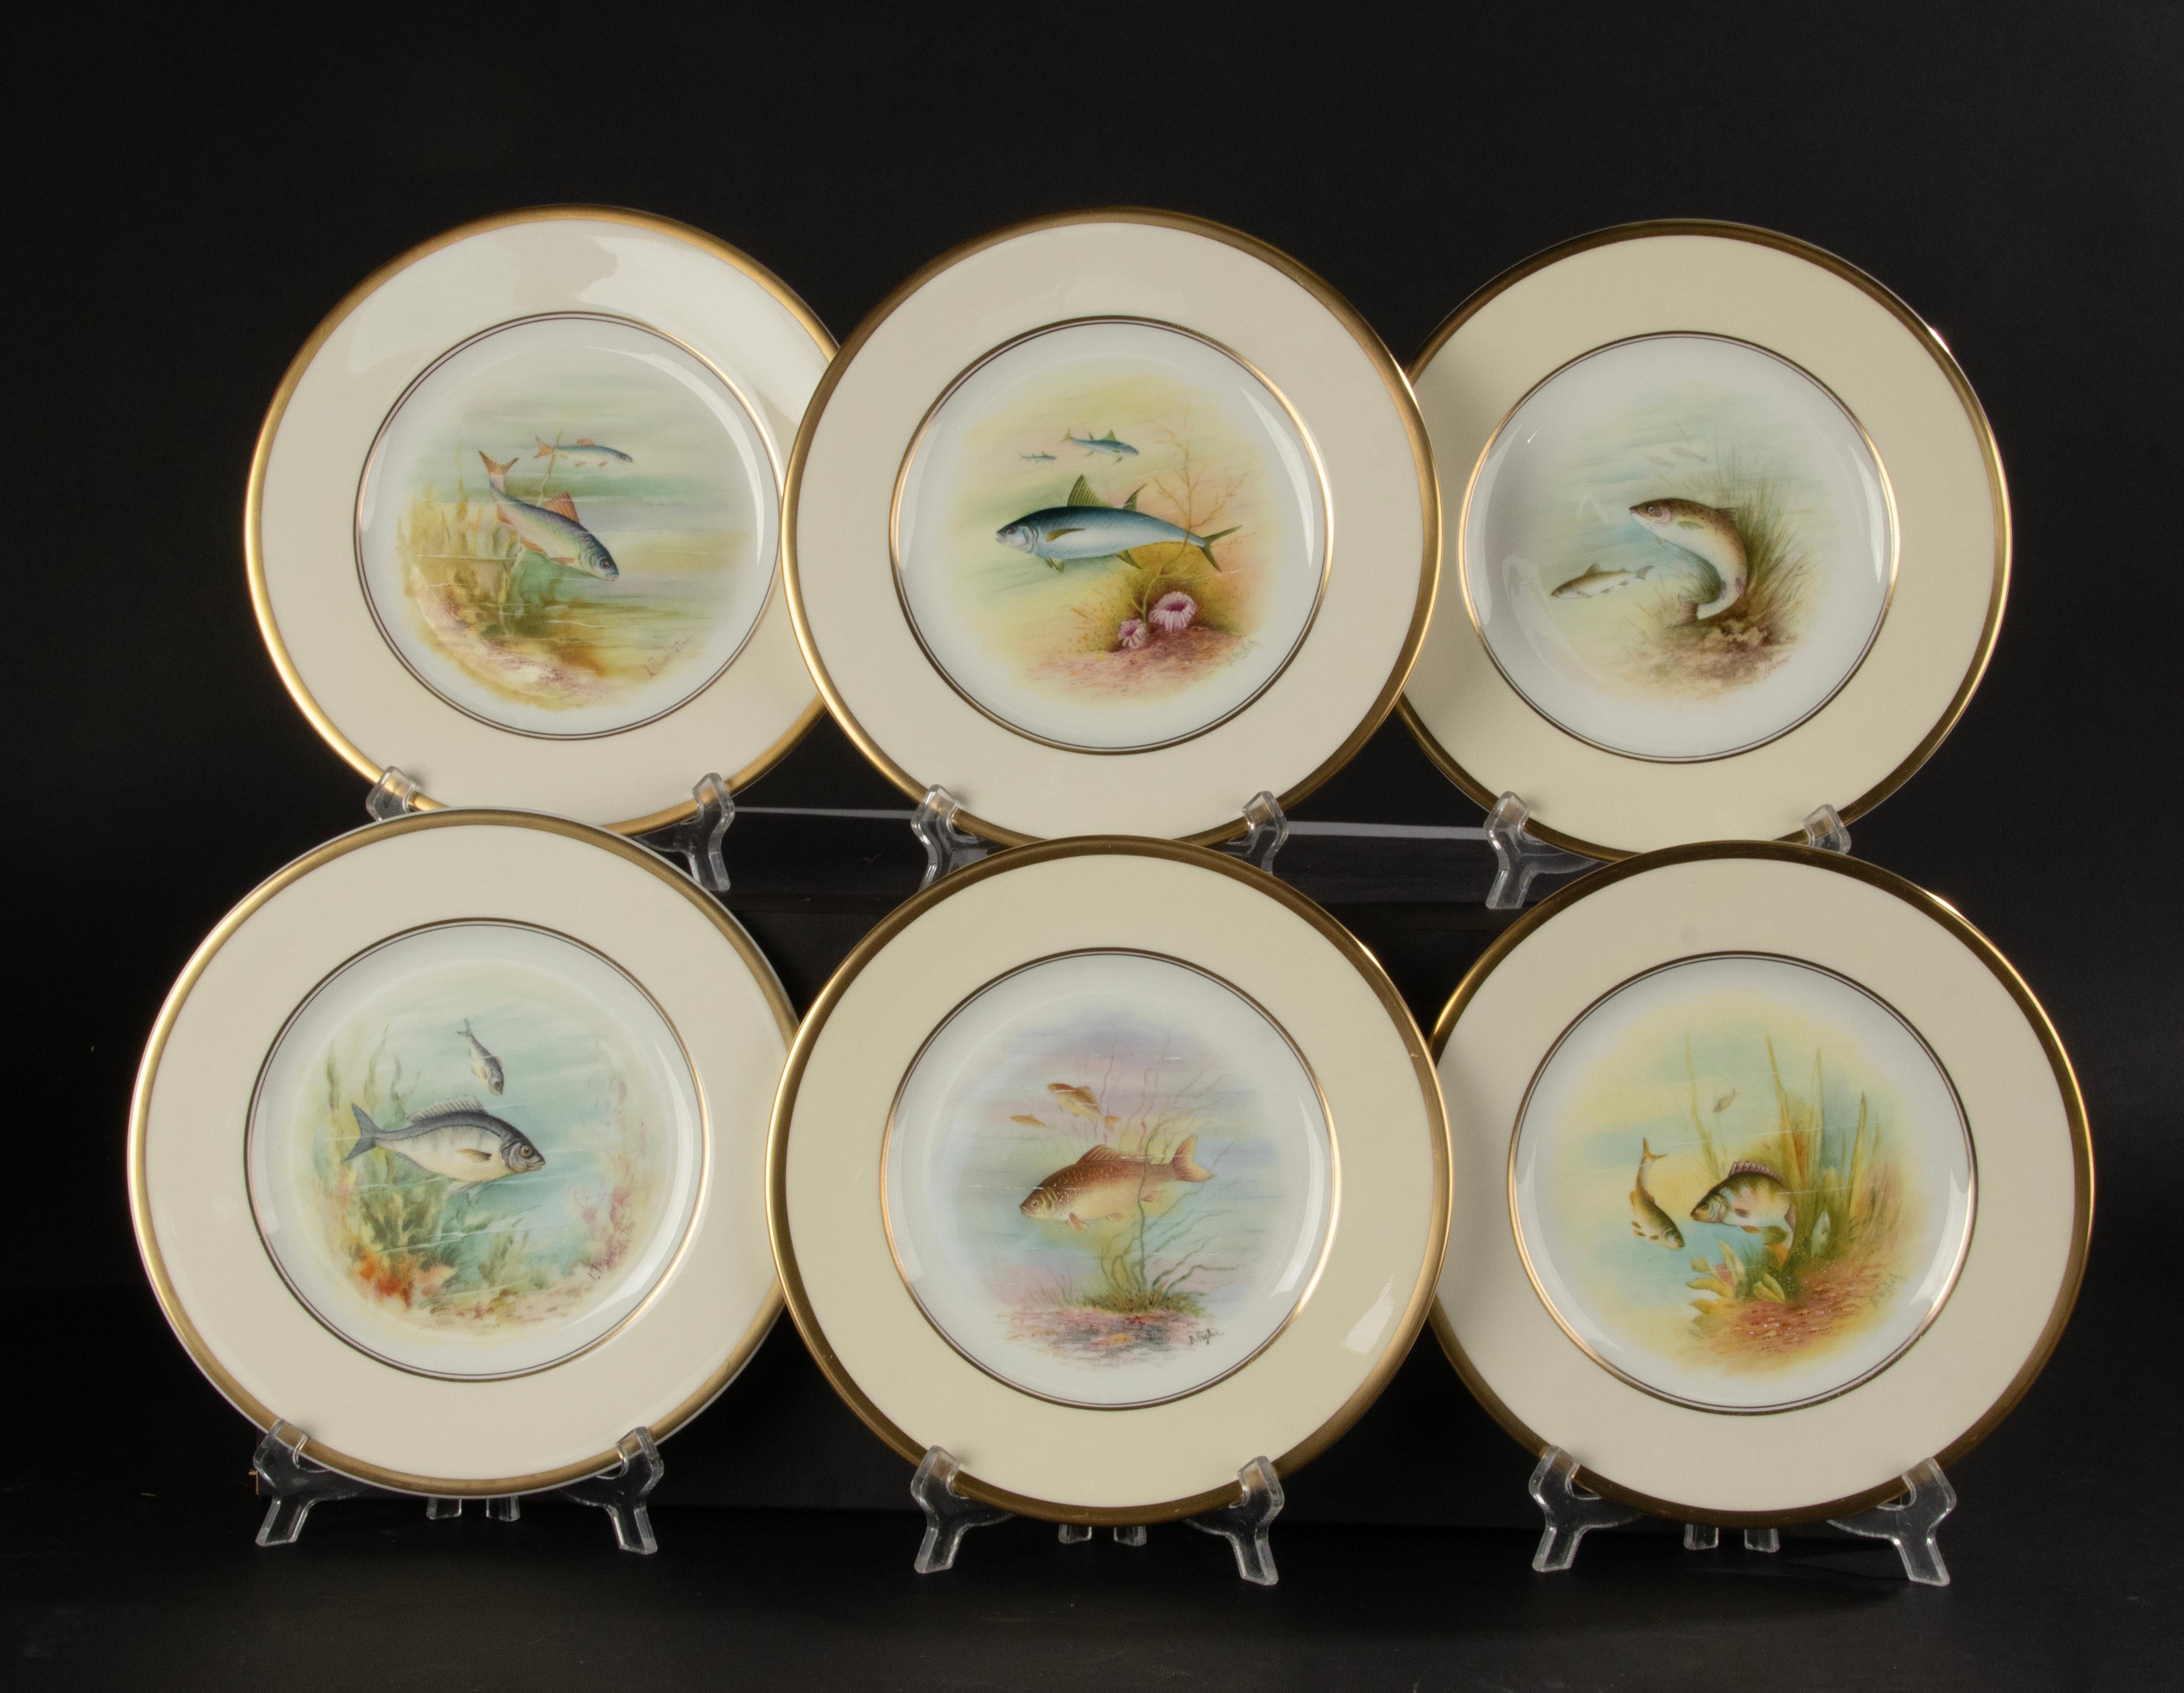 A great set of 6 porcelain fish plates, made by the English brand Minton.
The plates are handprinted with different kind of fish. 
The set is in great condition. No chips and no hairlines. The decorations and the gold colored trims are still nicely